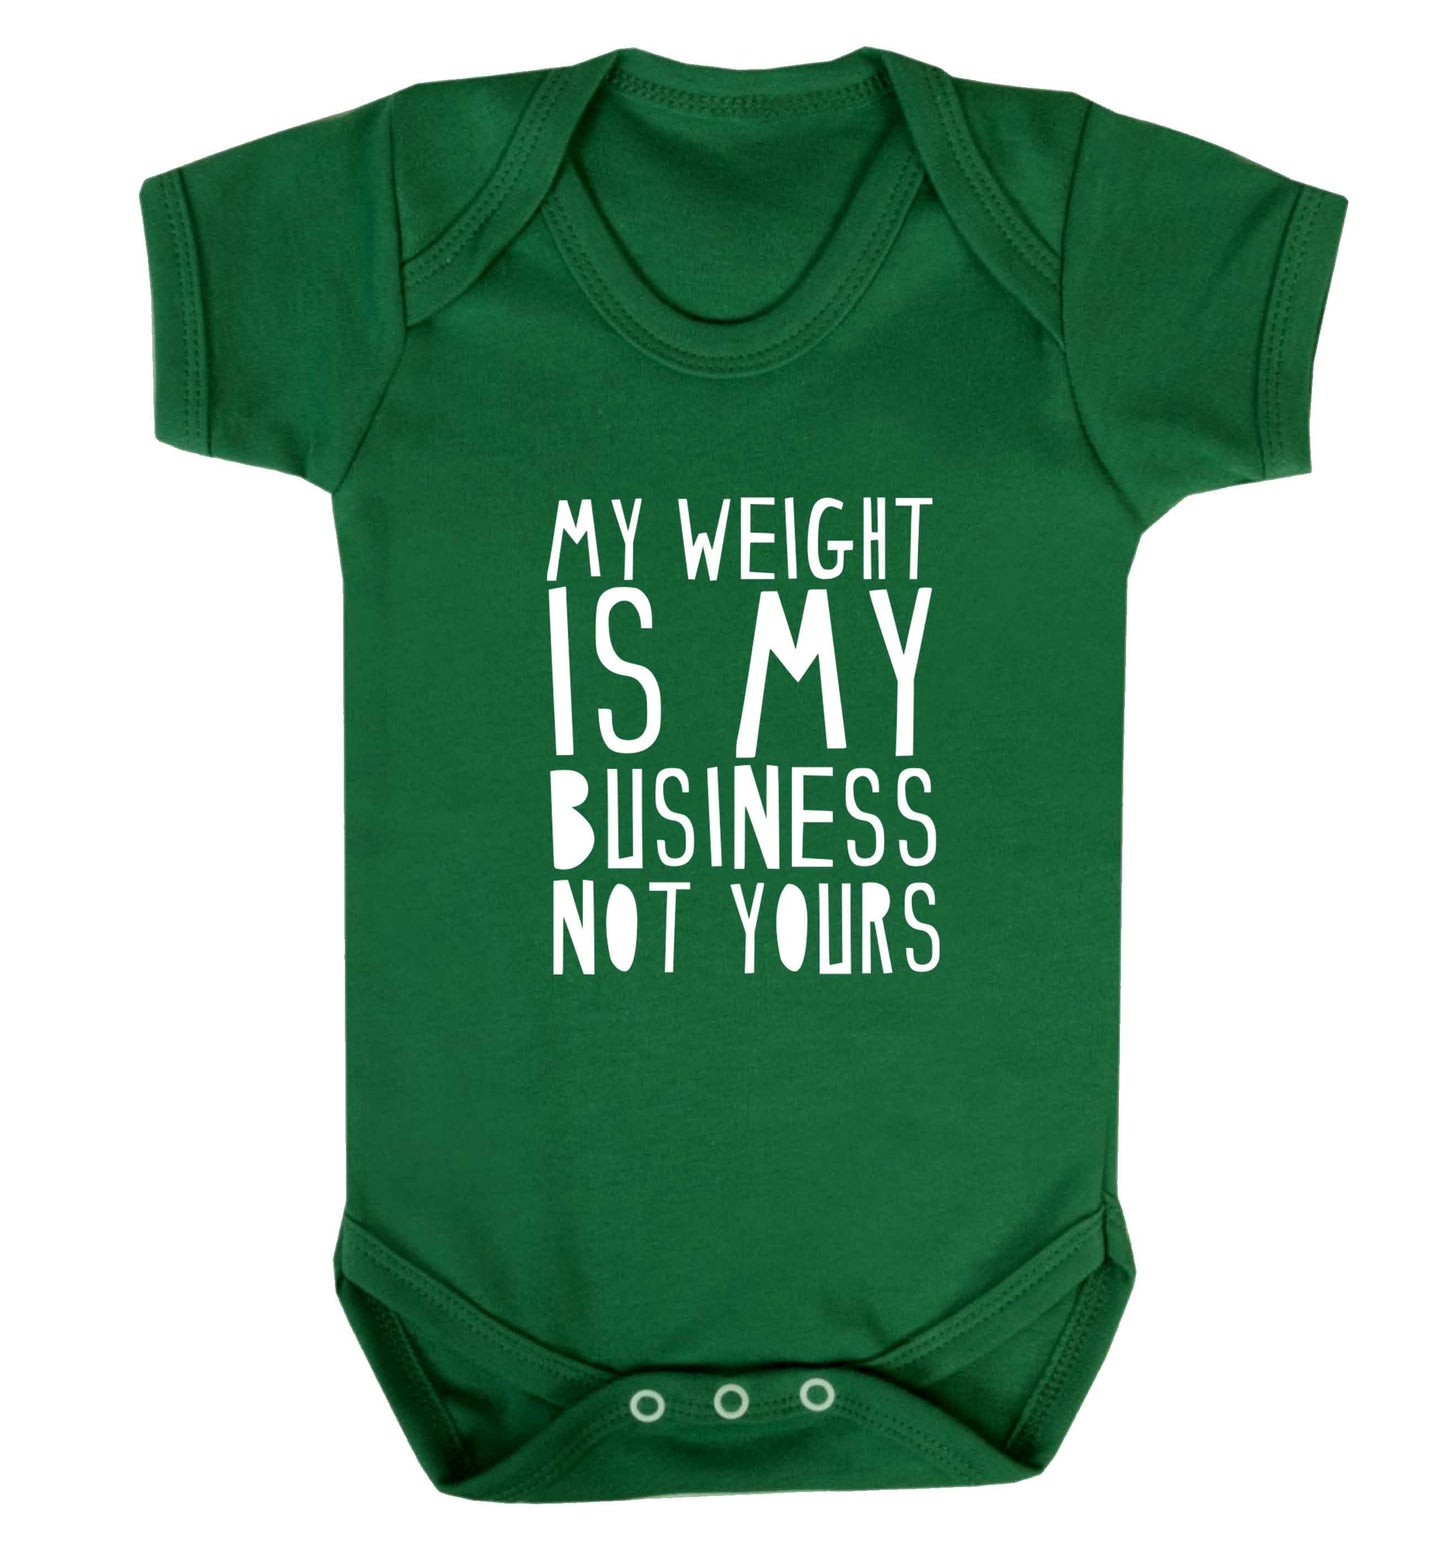 My weight is my business not yours baby vest green 18-24 months